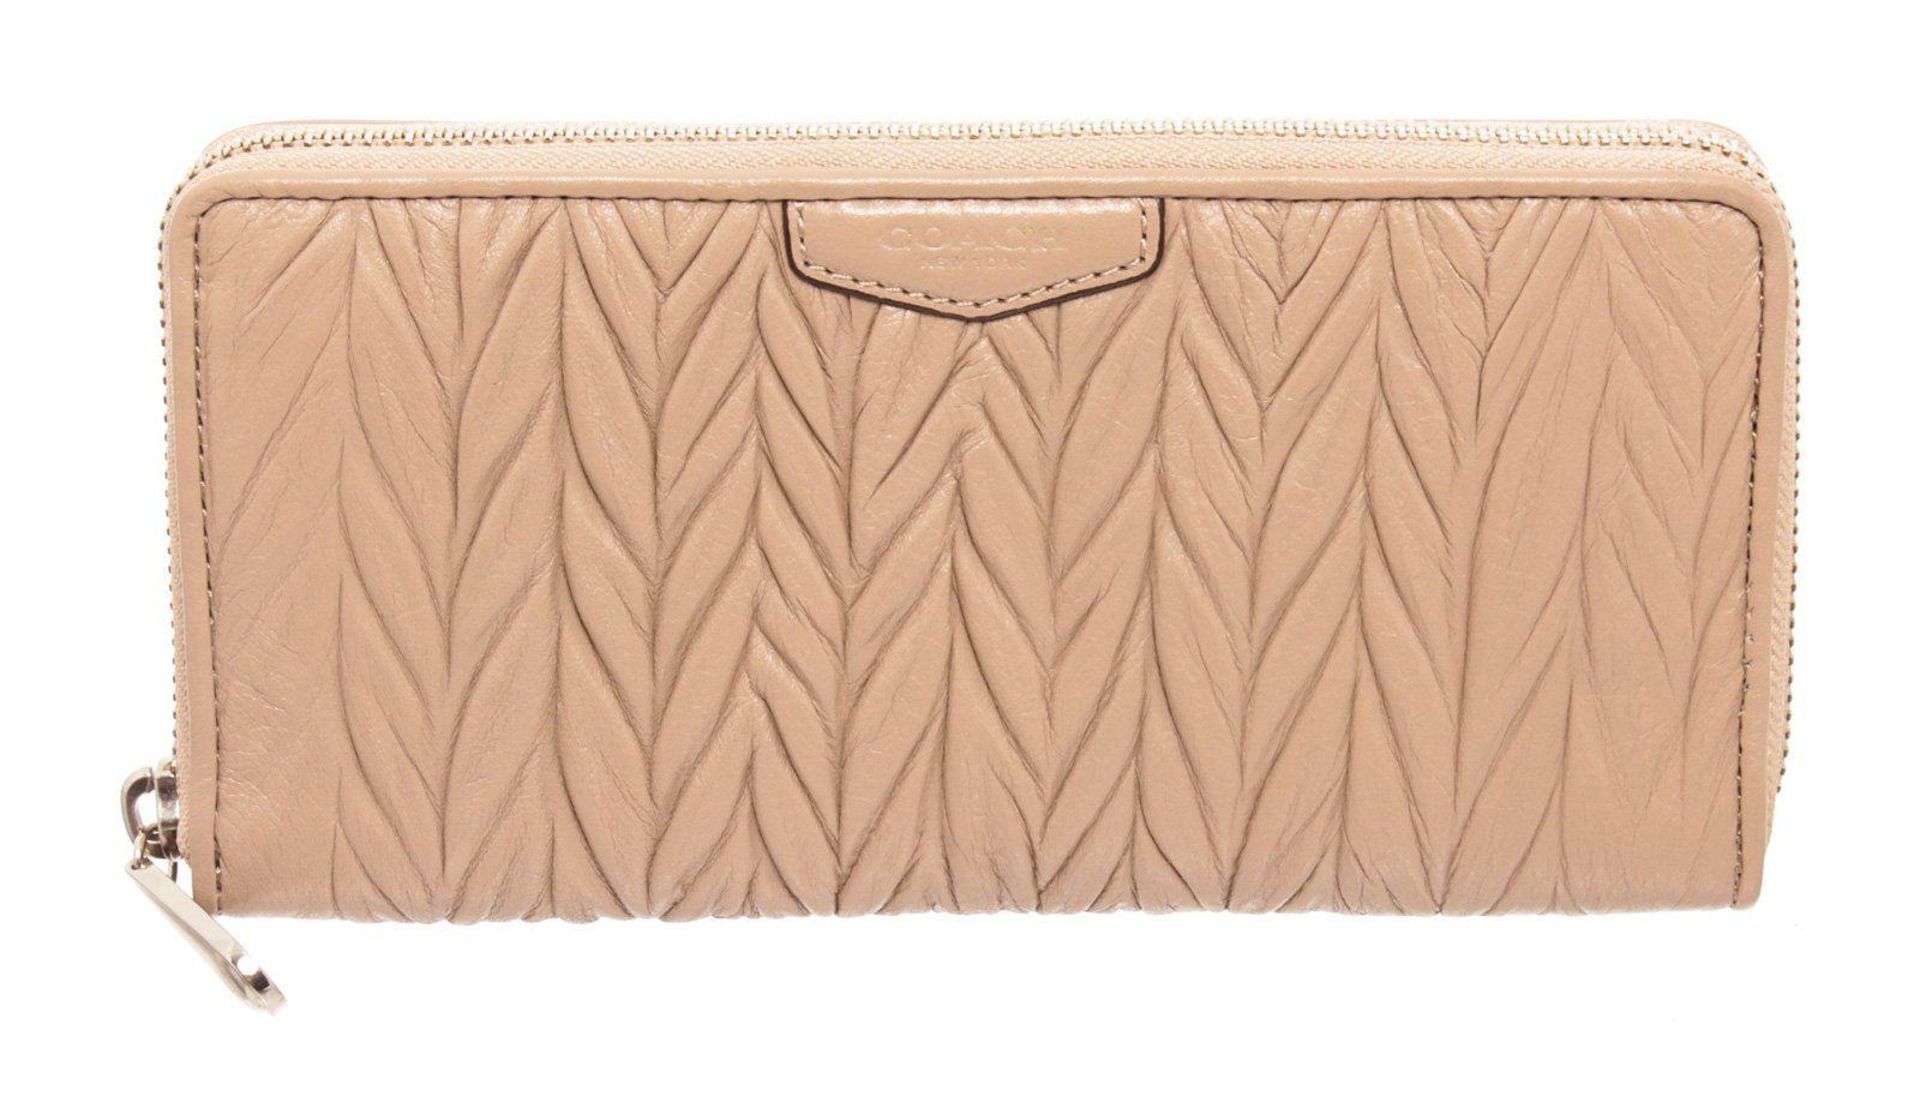 Coach Beige Gathered Leather Zippy Wallet